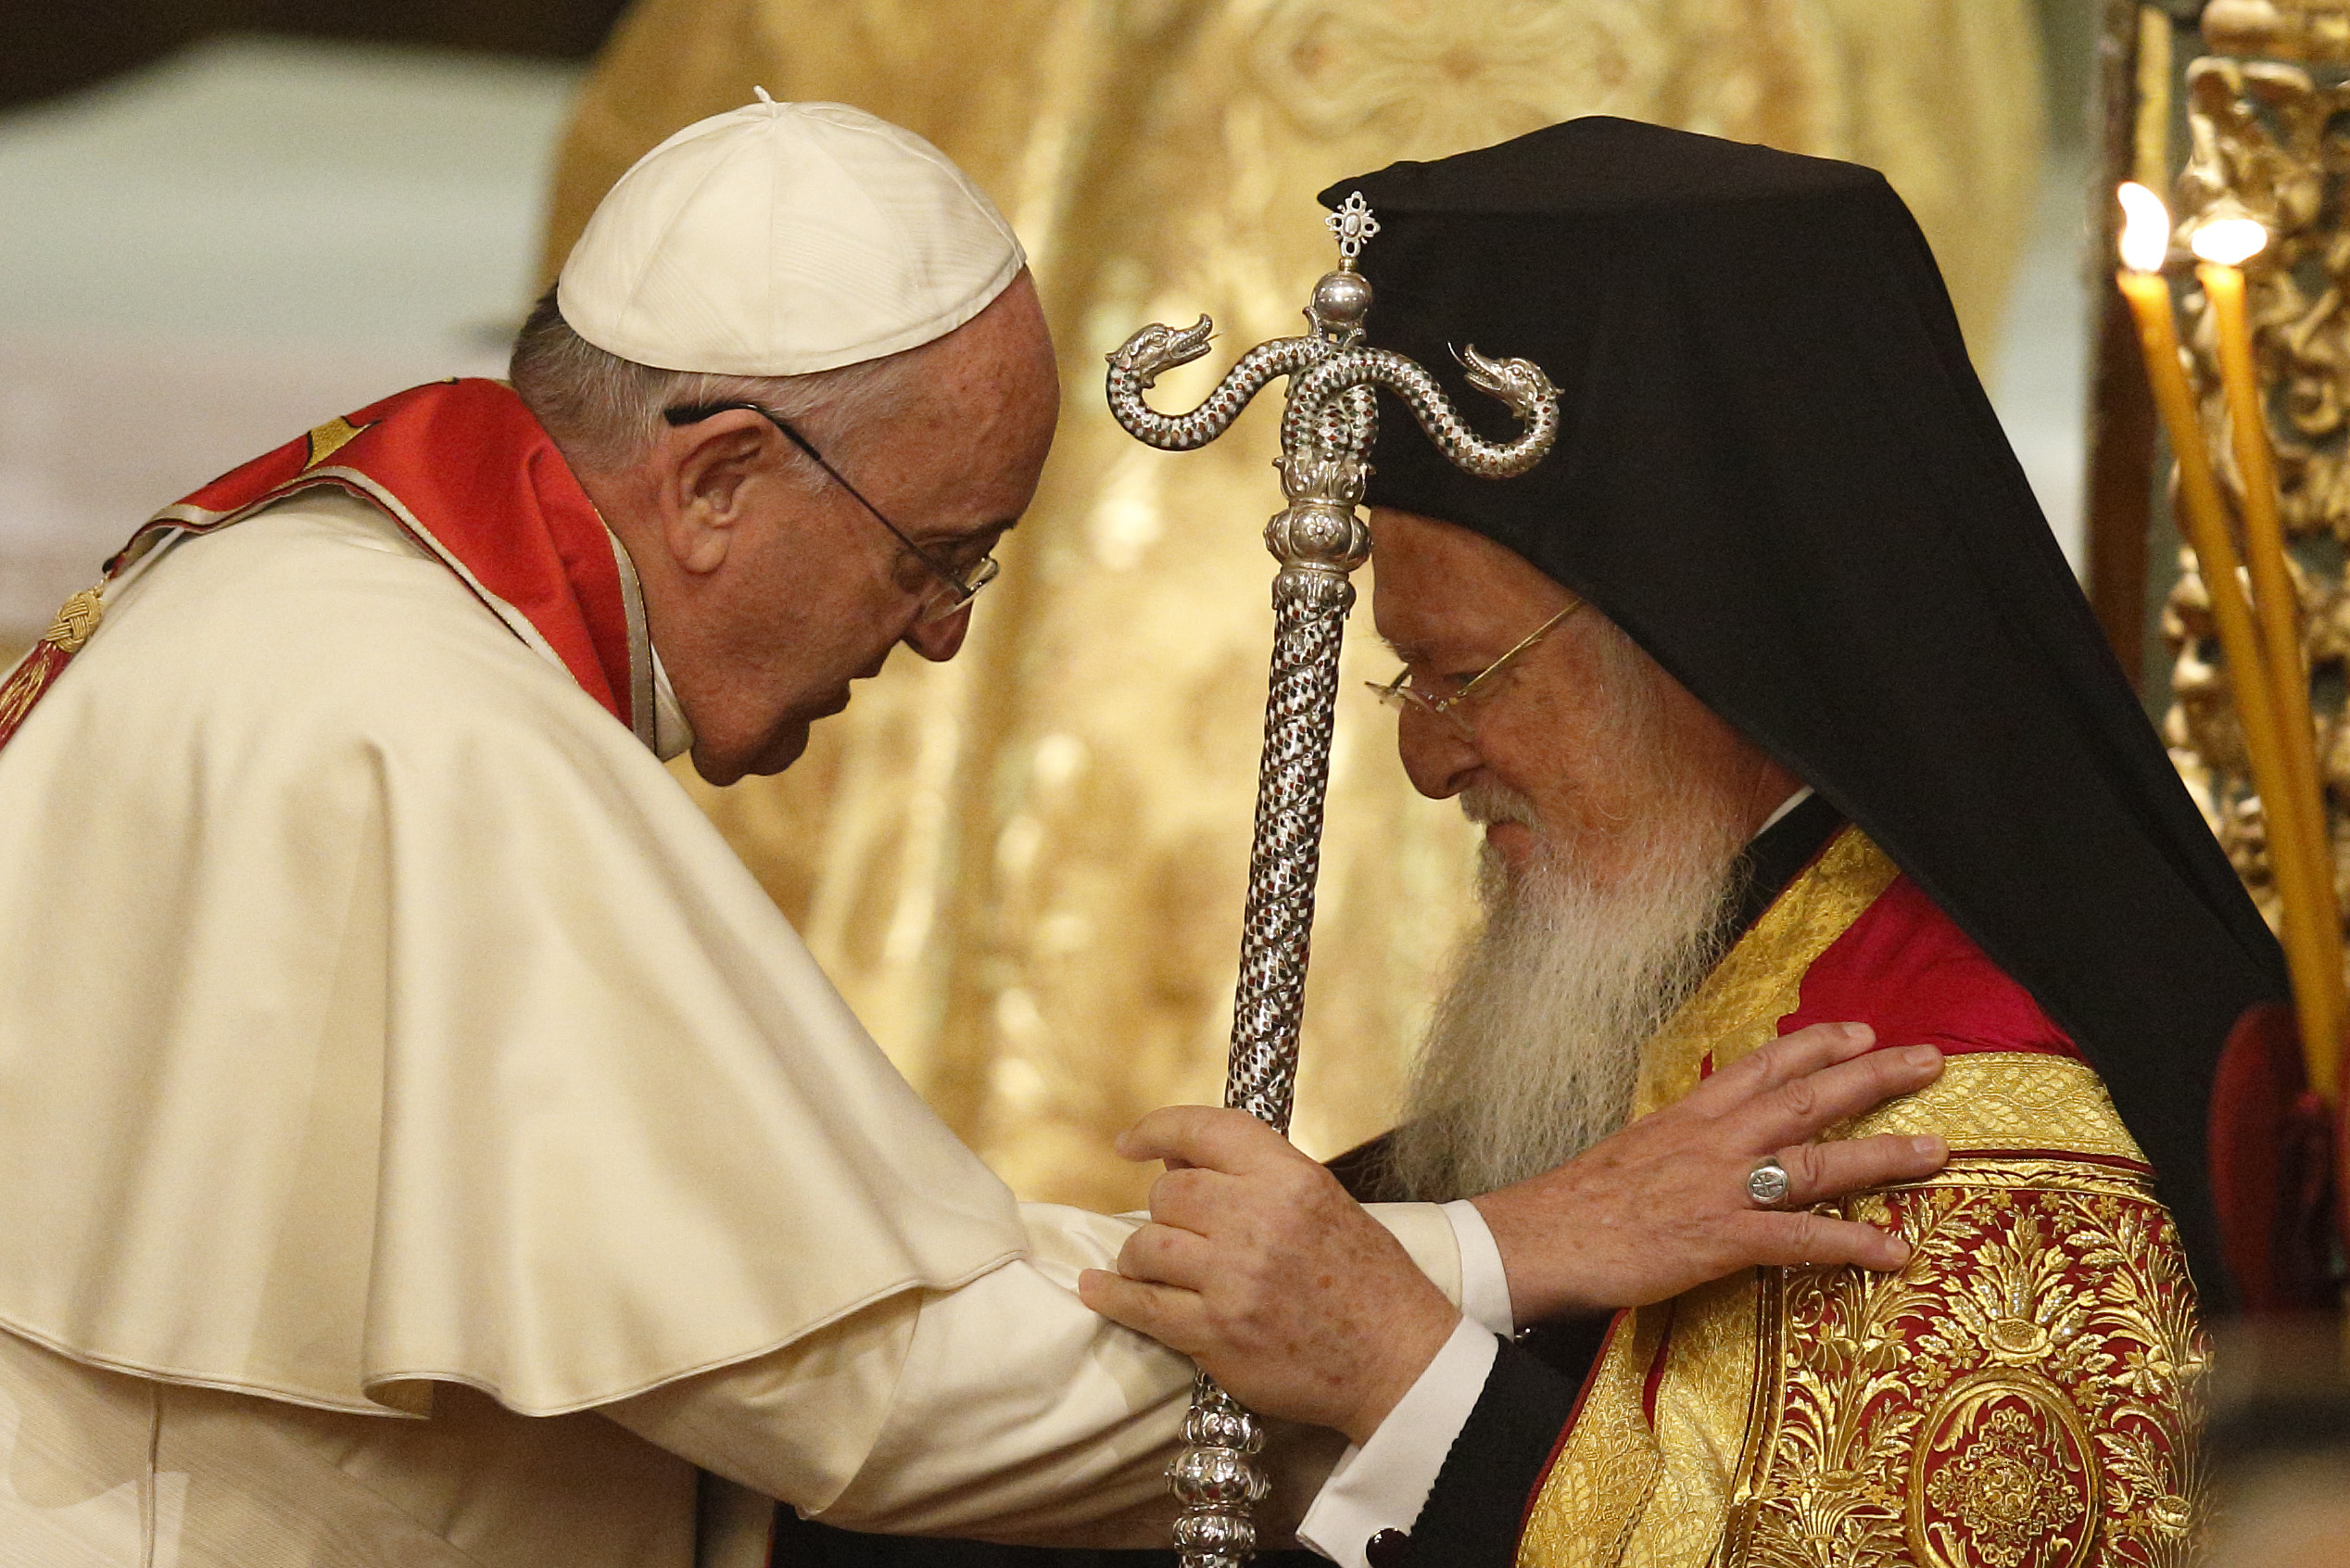 Christian leaders meet in Bari to pray for Middle East